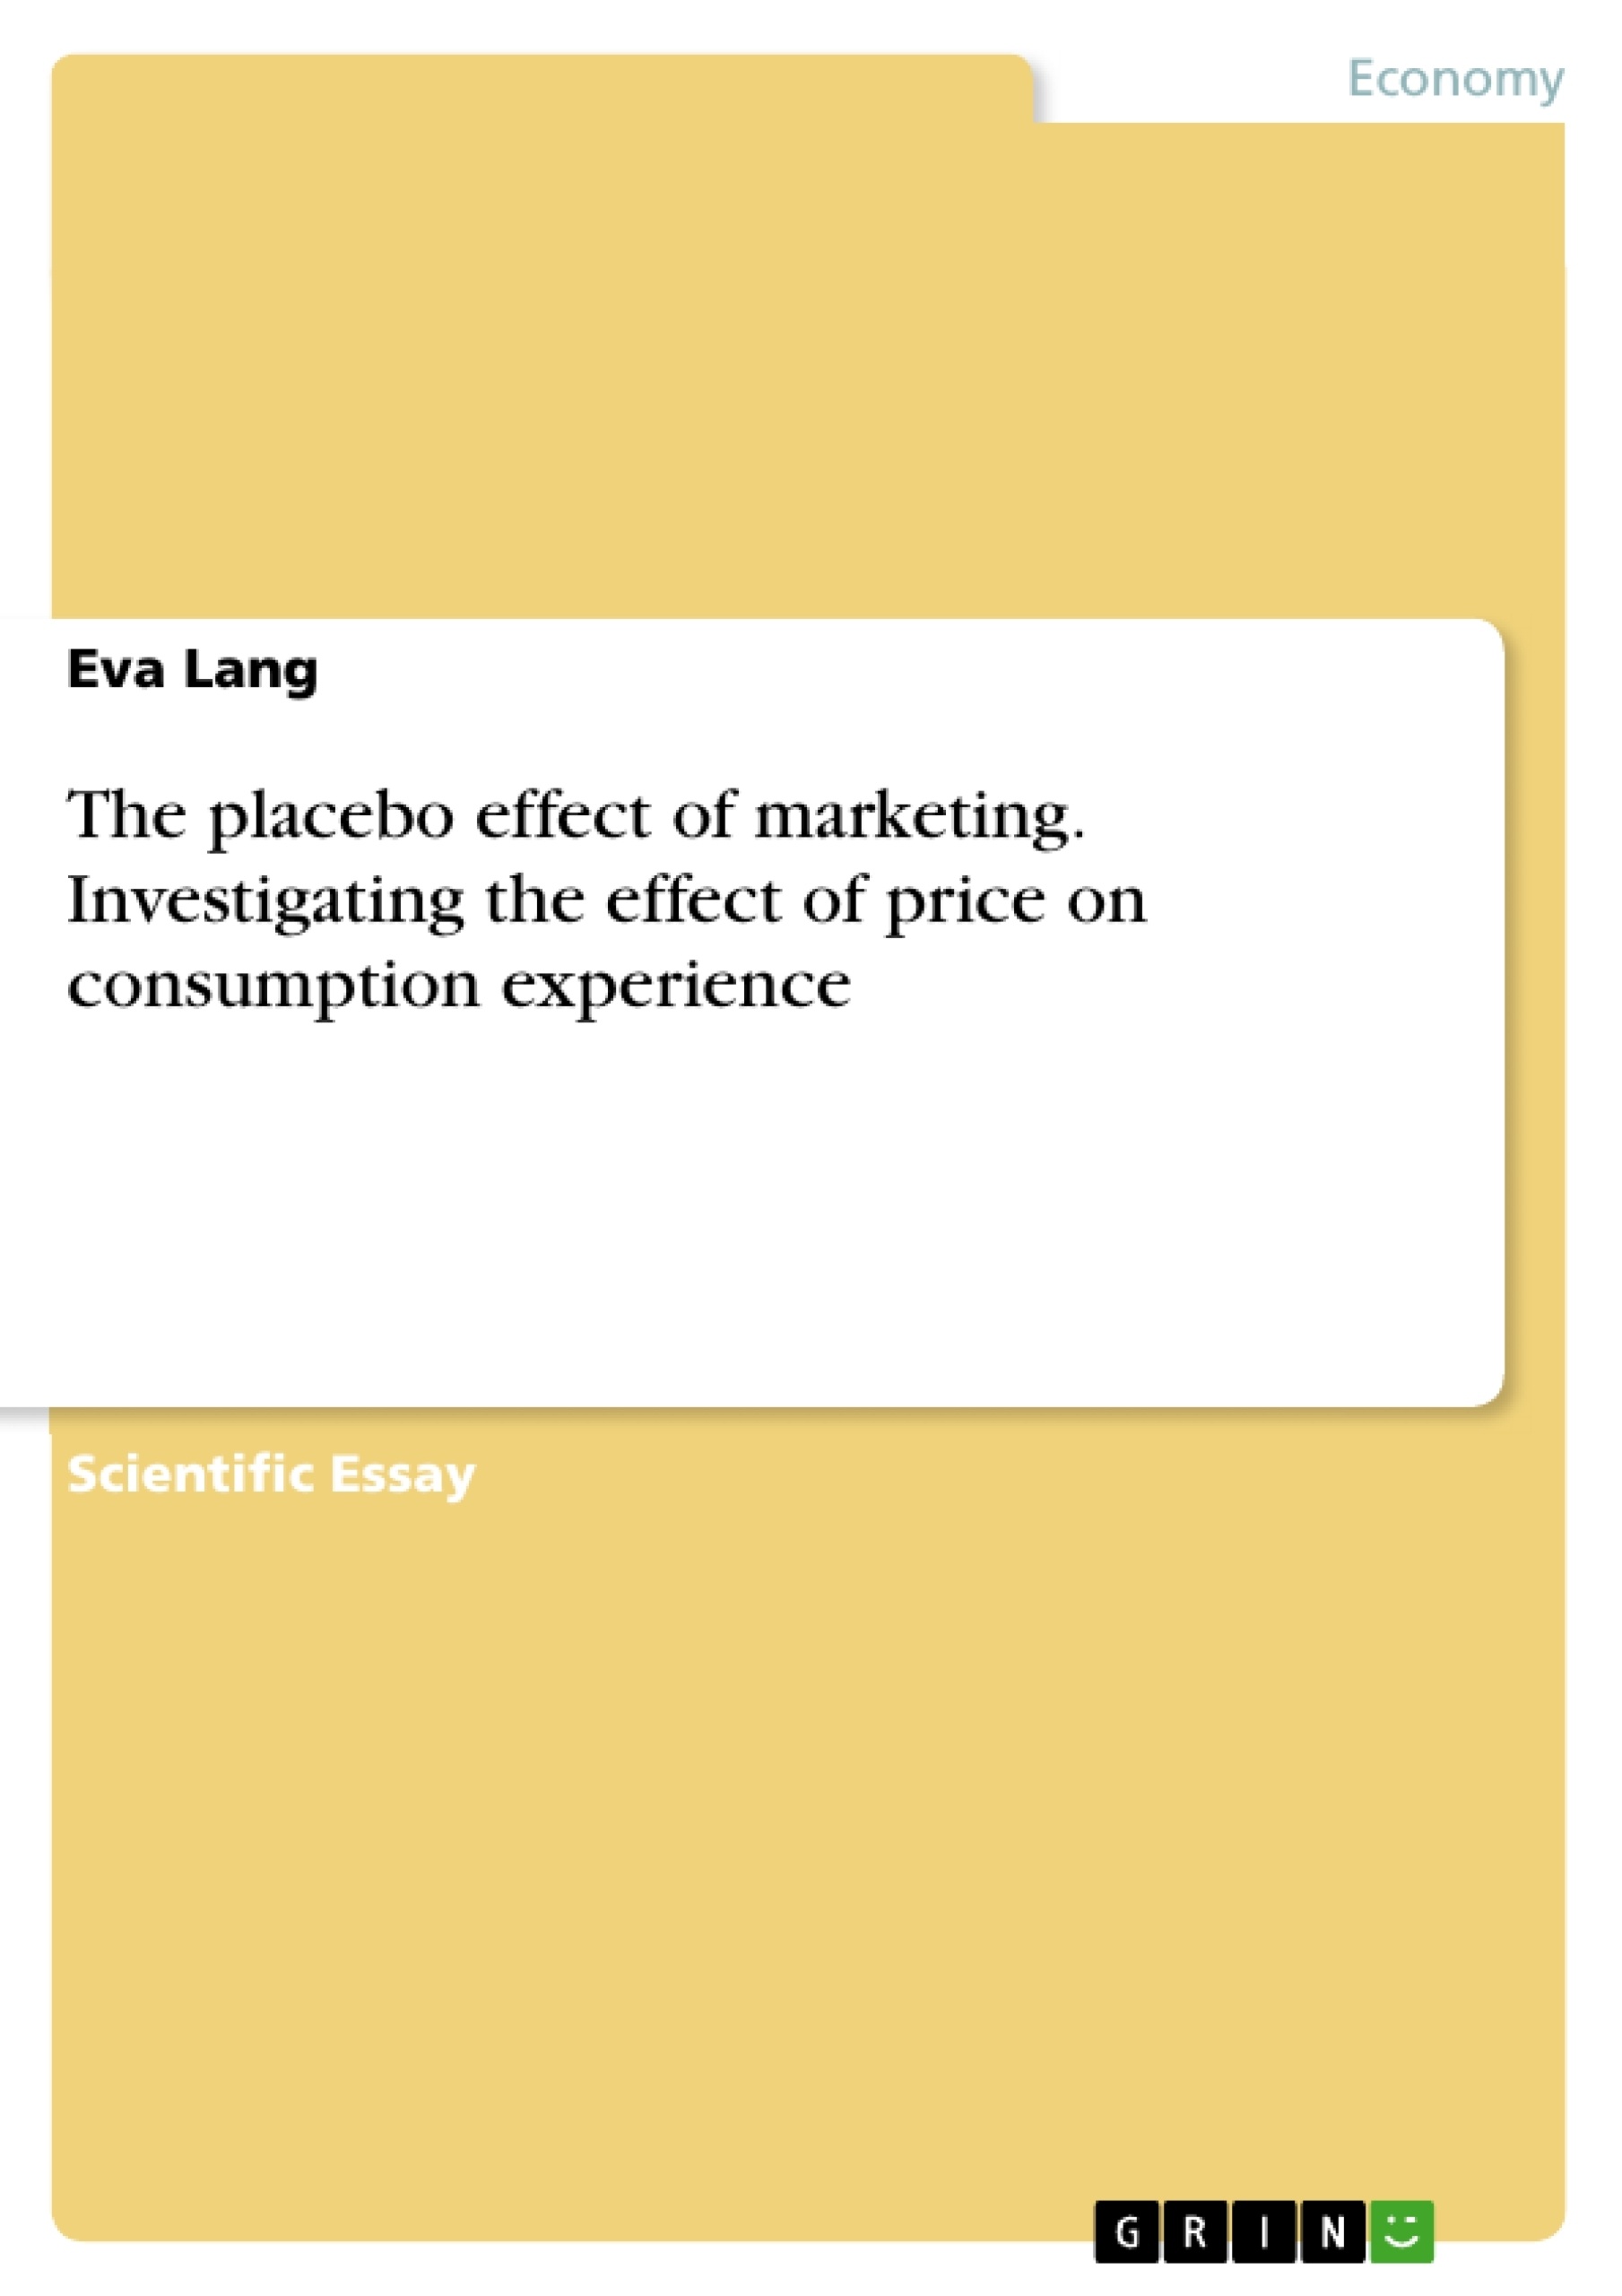 Title: The placebo effect of marketing. Investigating the effect of price on consumption experience